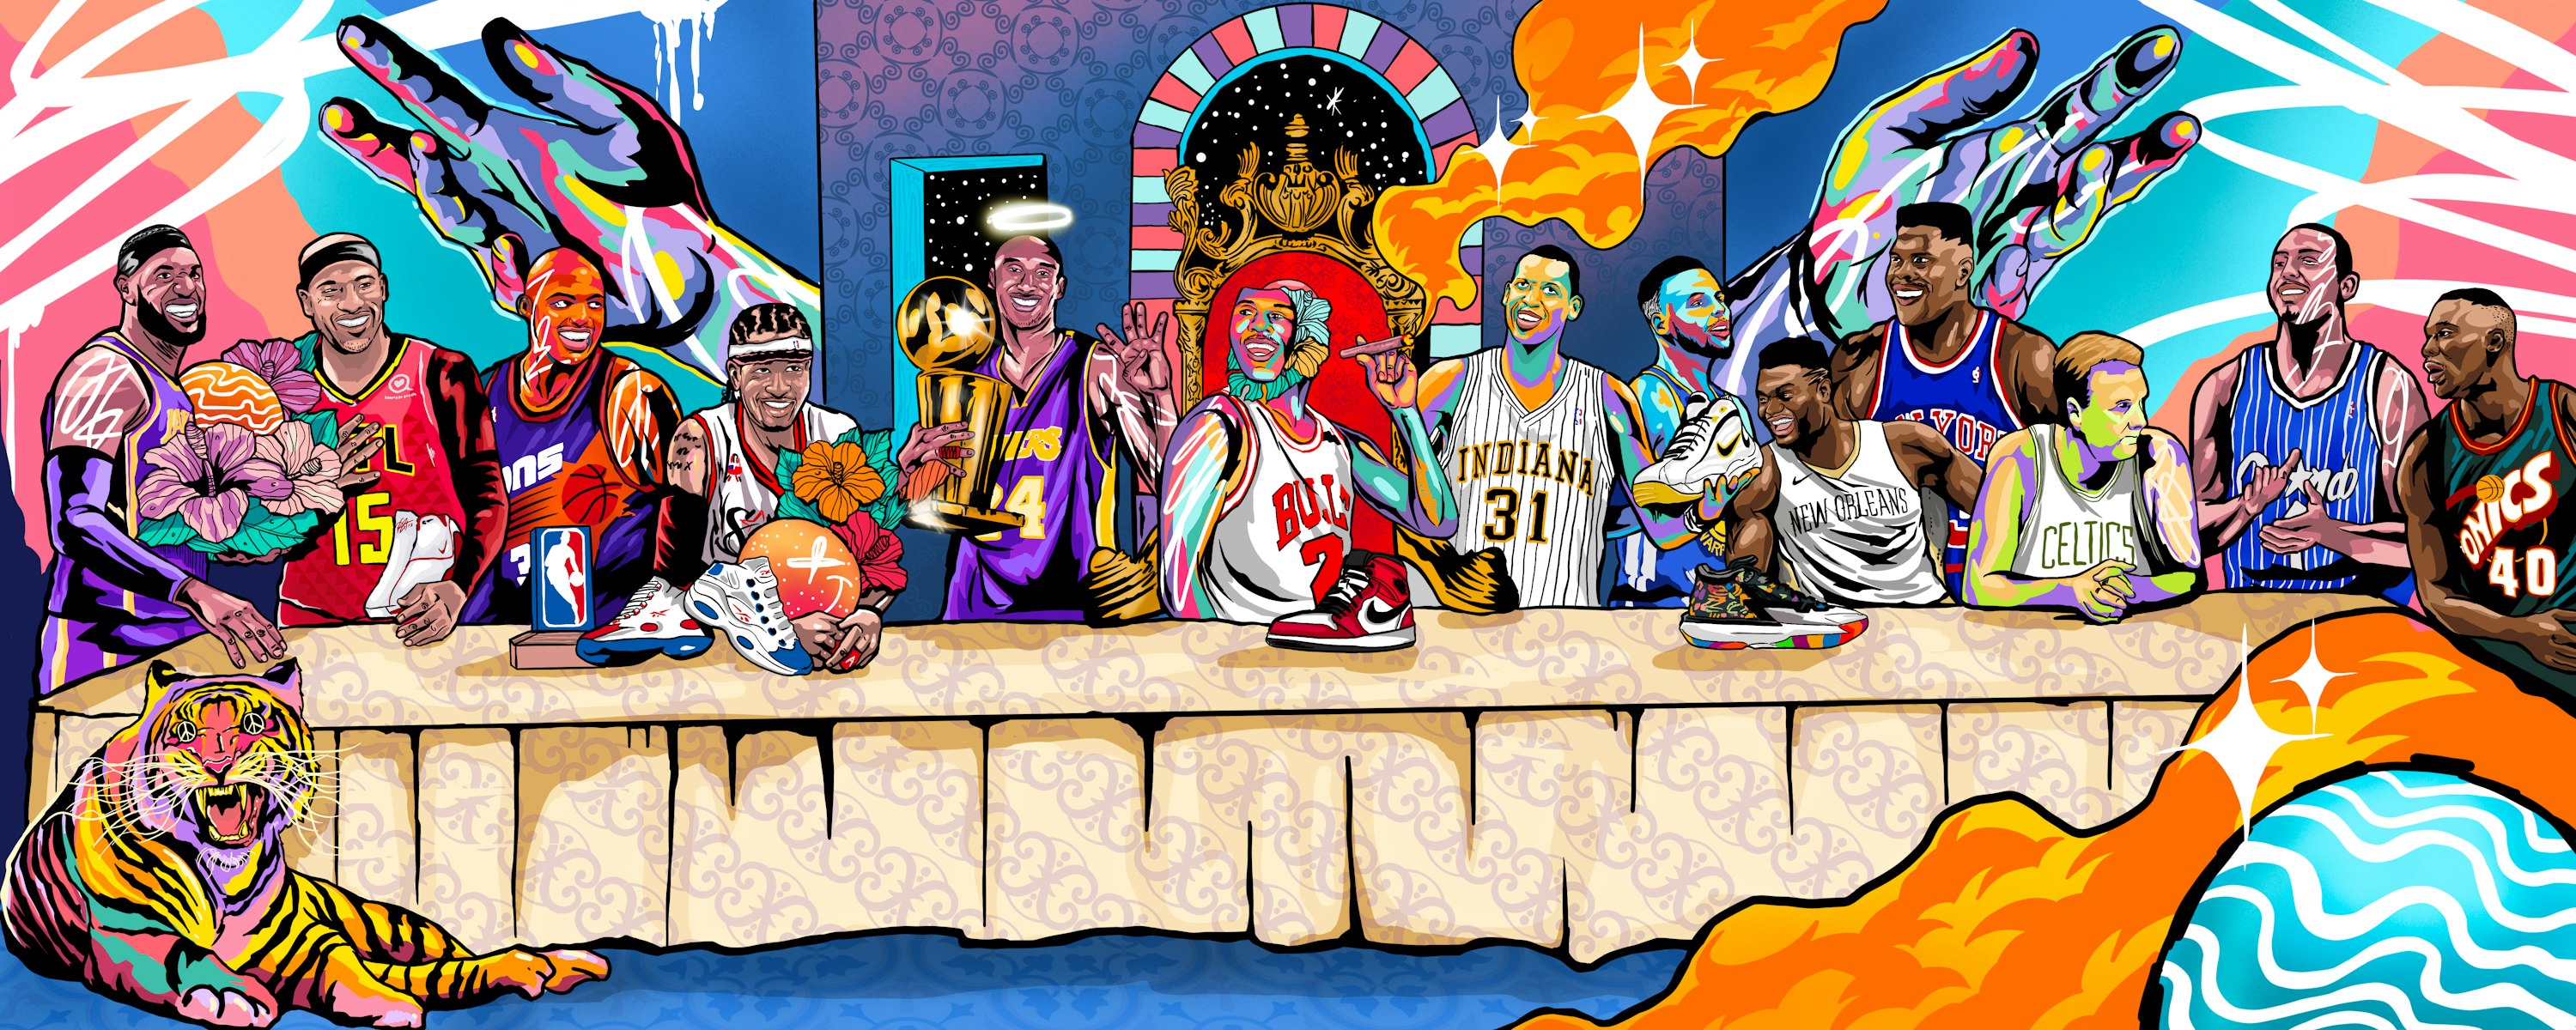 The last supper NBA | Foundation